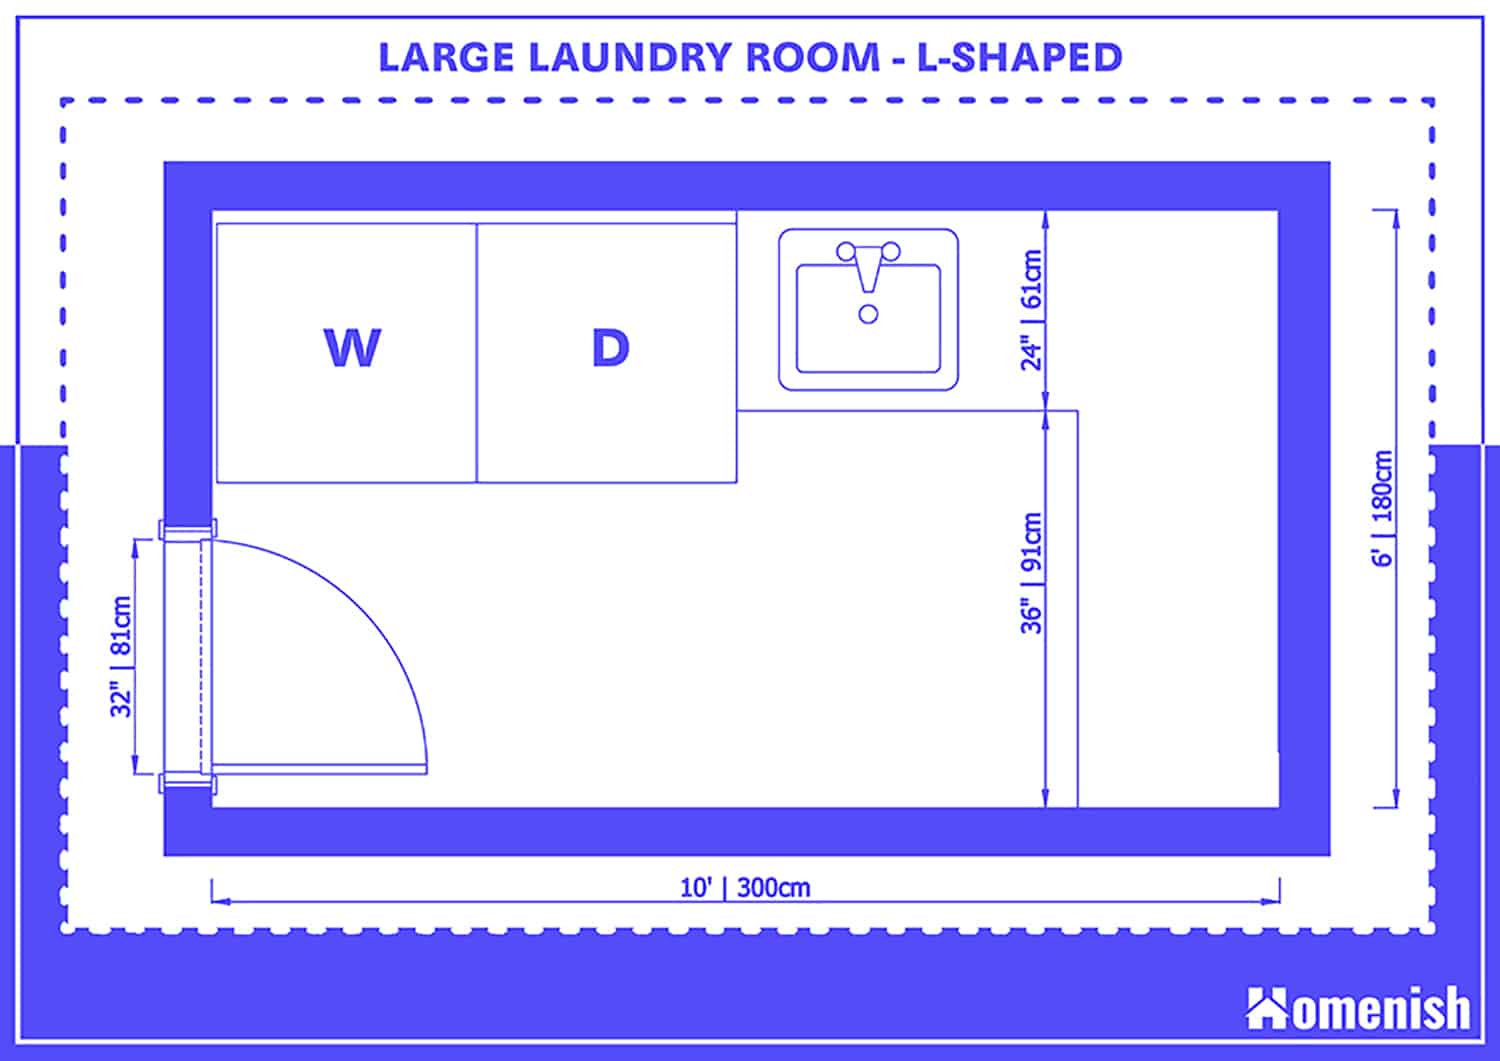 Large Laundry Room - L-shaped